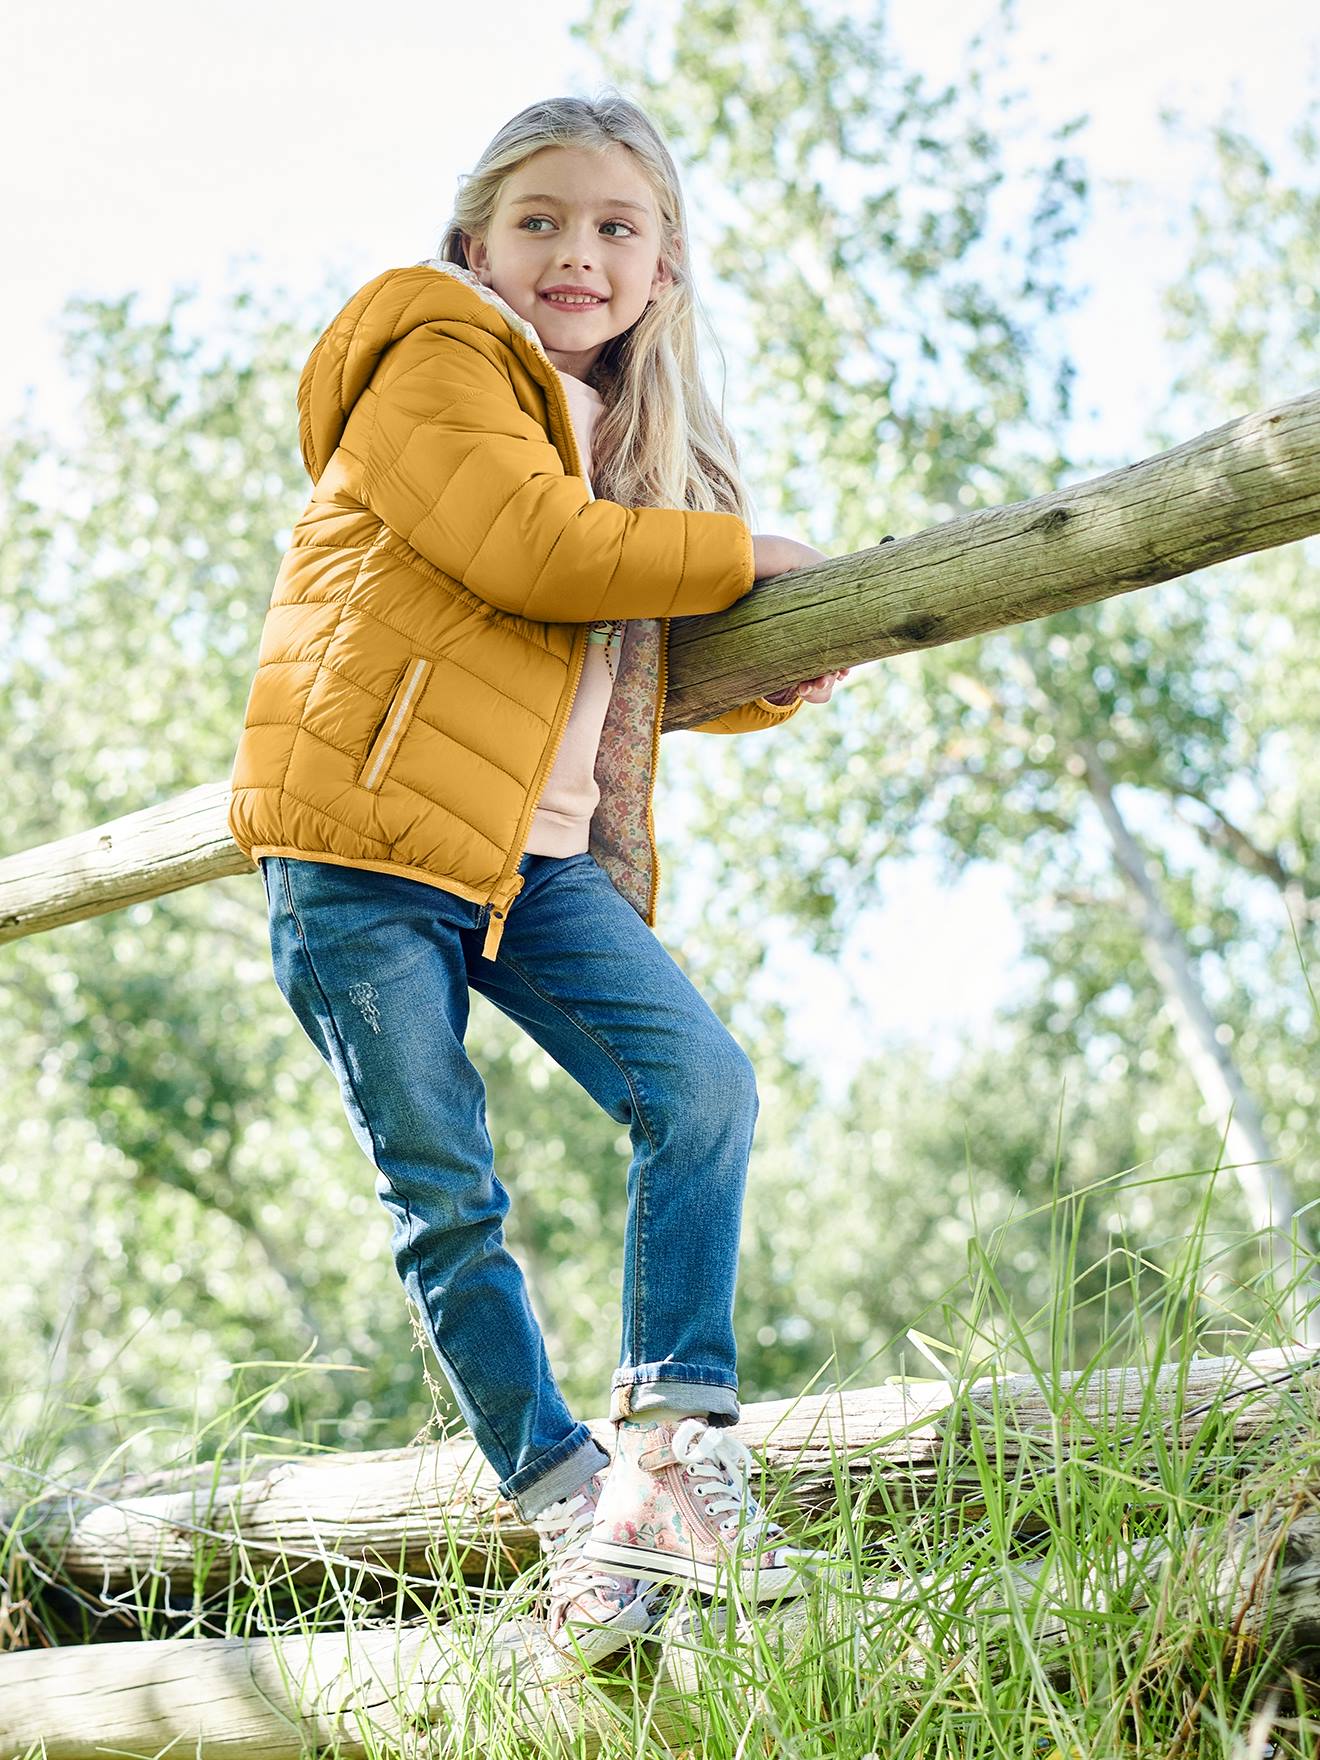 Vertbaudet Reversible Lightweight Padded Jacket with Padding in Recycled POLYESTER, for Girls